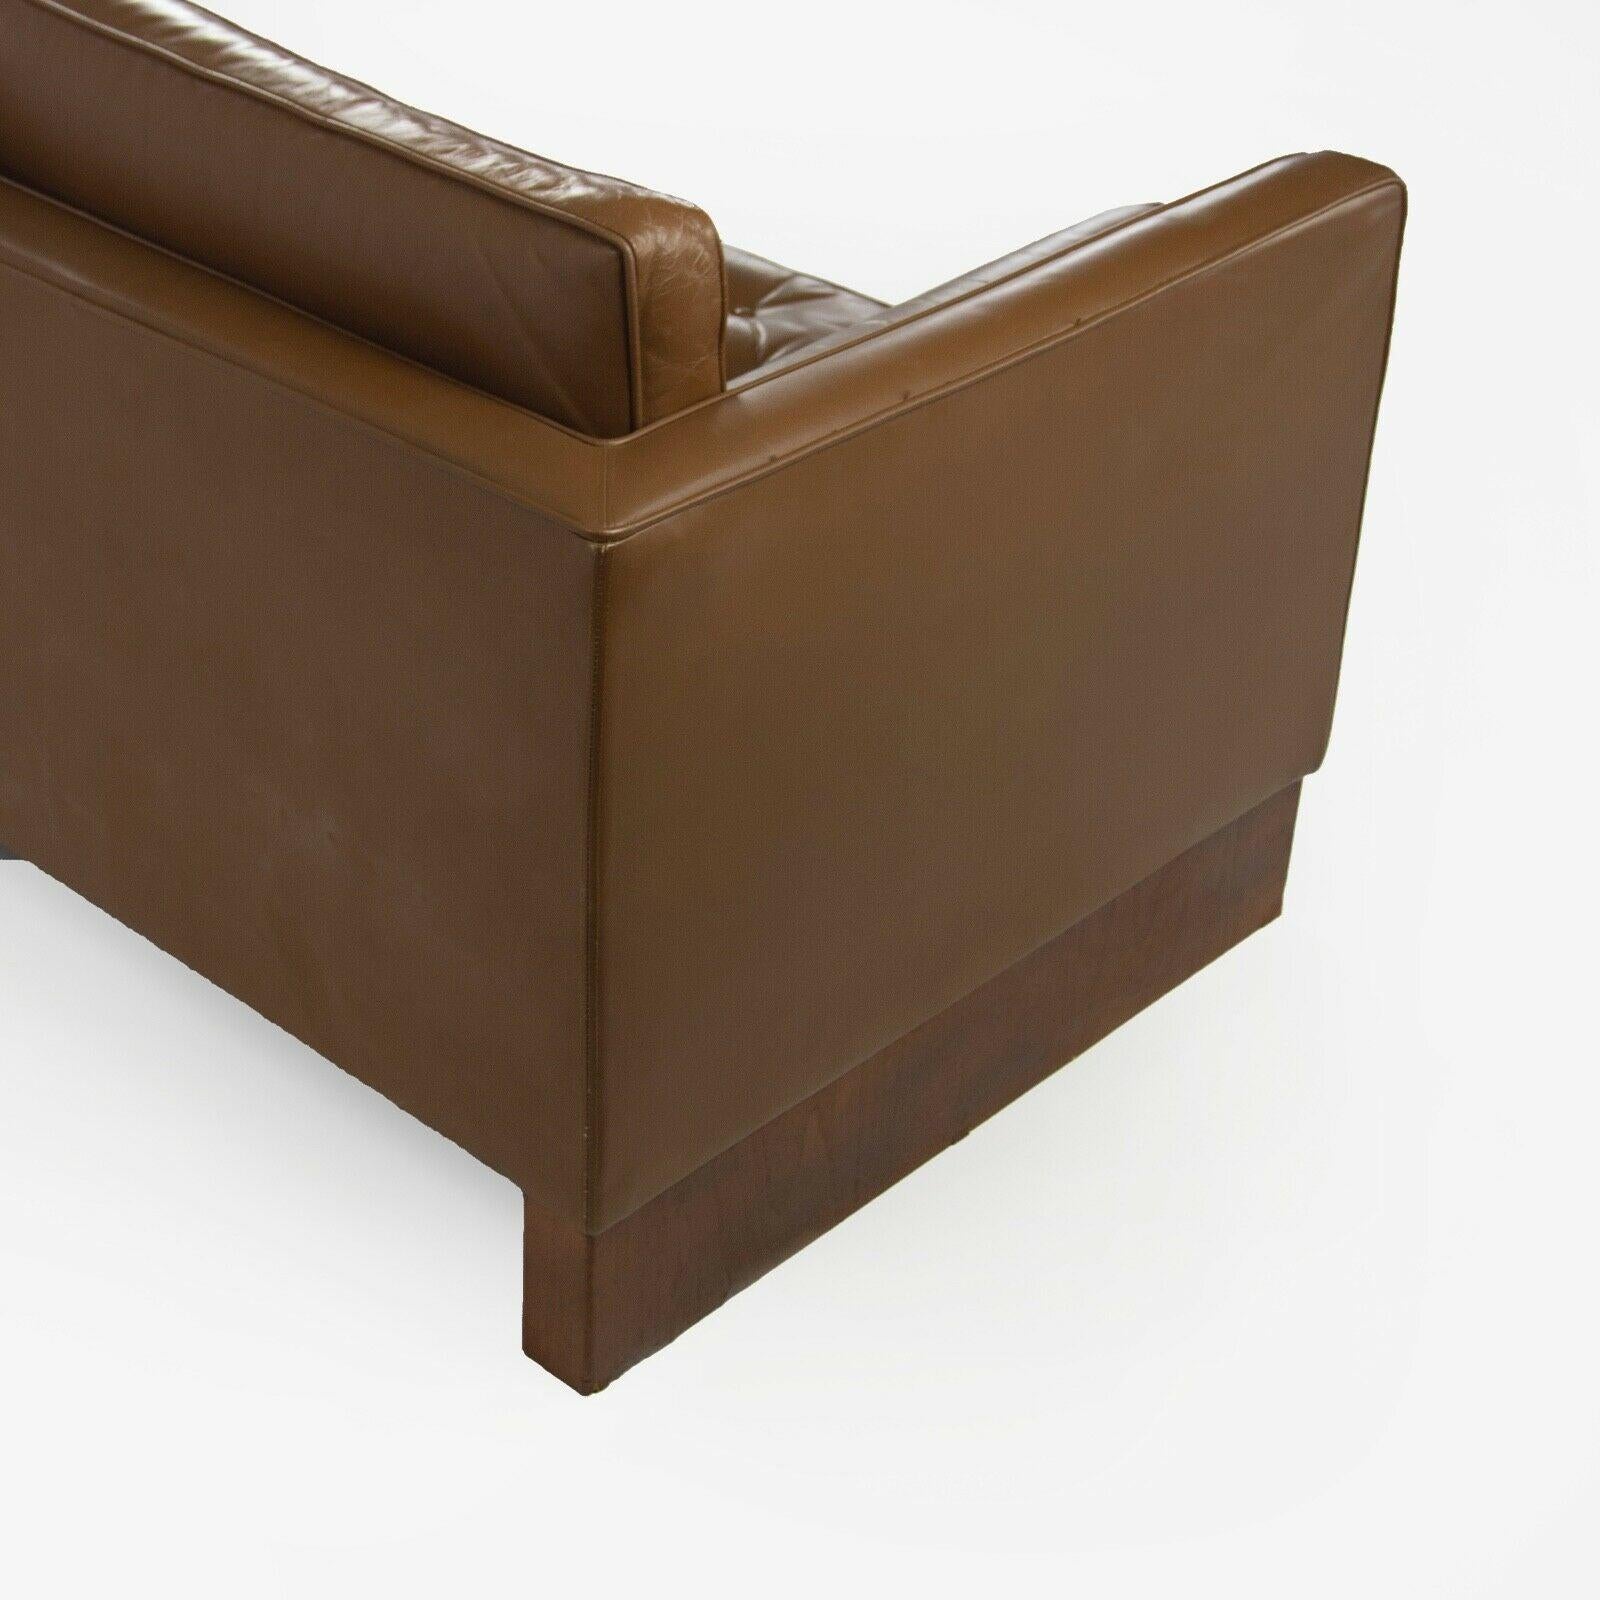 1960s Mies Van Der Rohe for Knoll International Brown Leather Three Seat Sofa For Sale 3